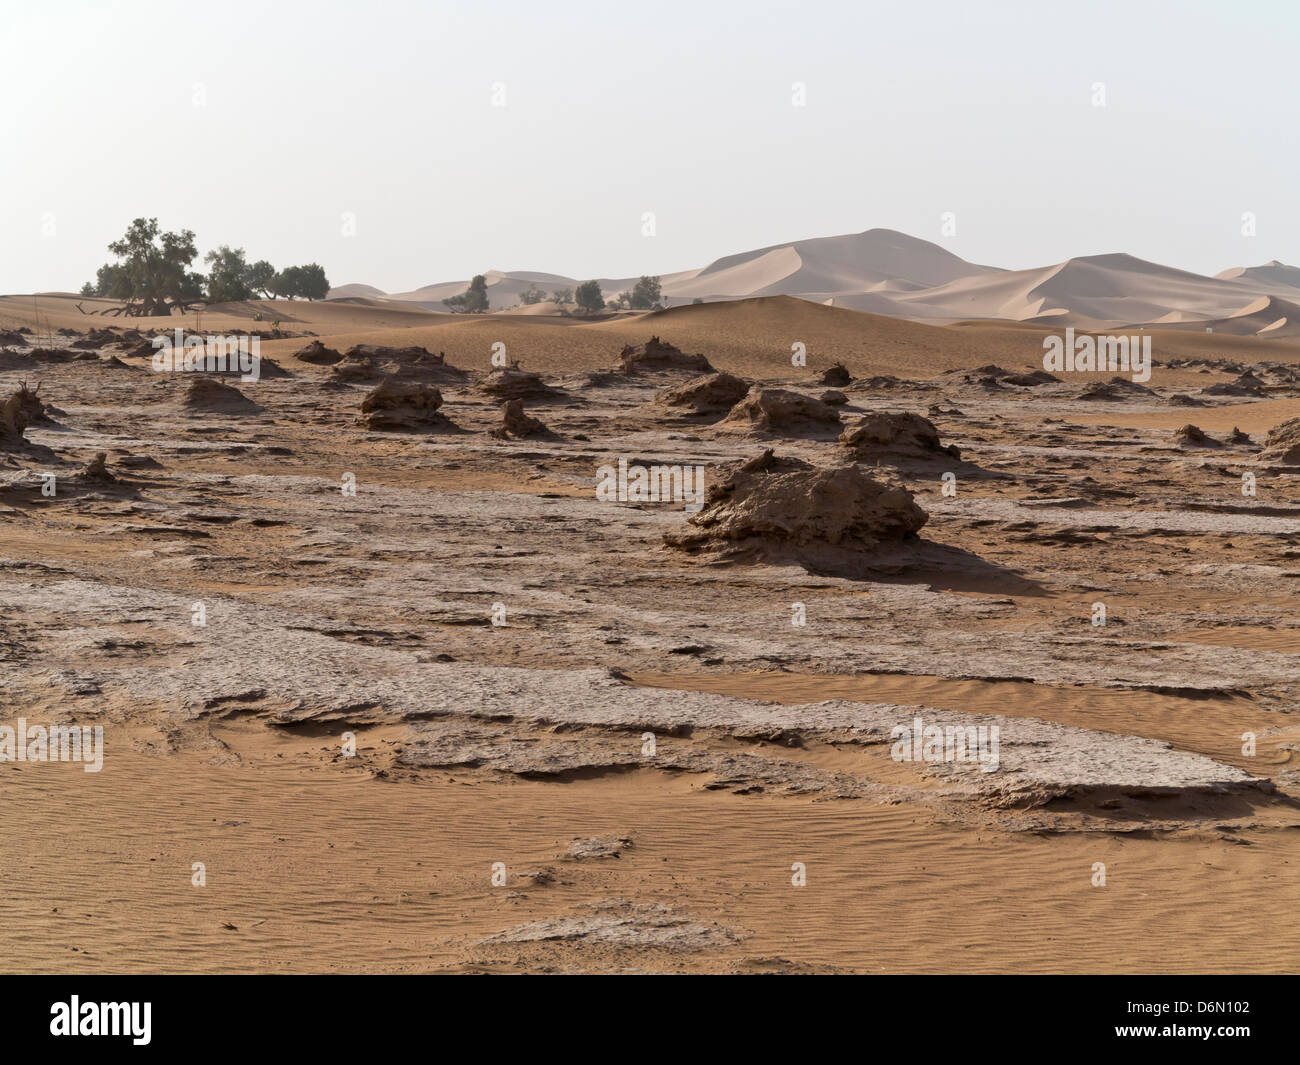 Moroccan landscape - looking across plains in southern Morocco Stock Photo